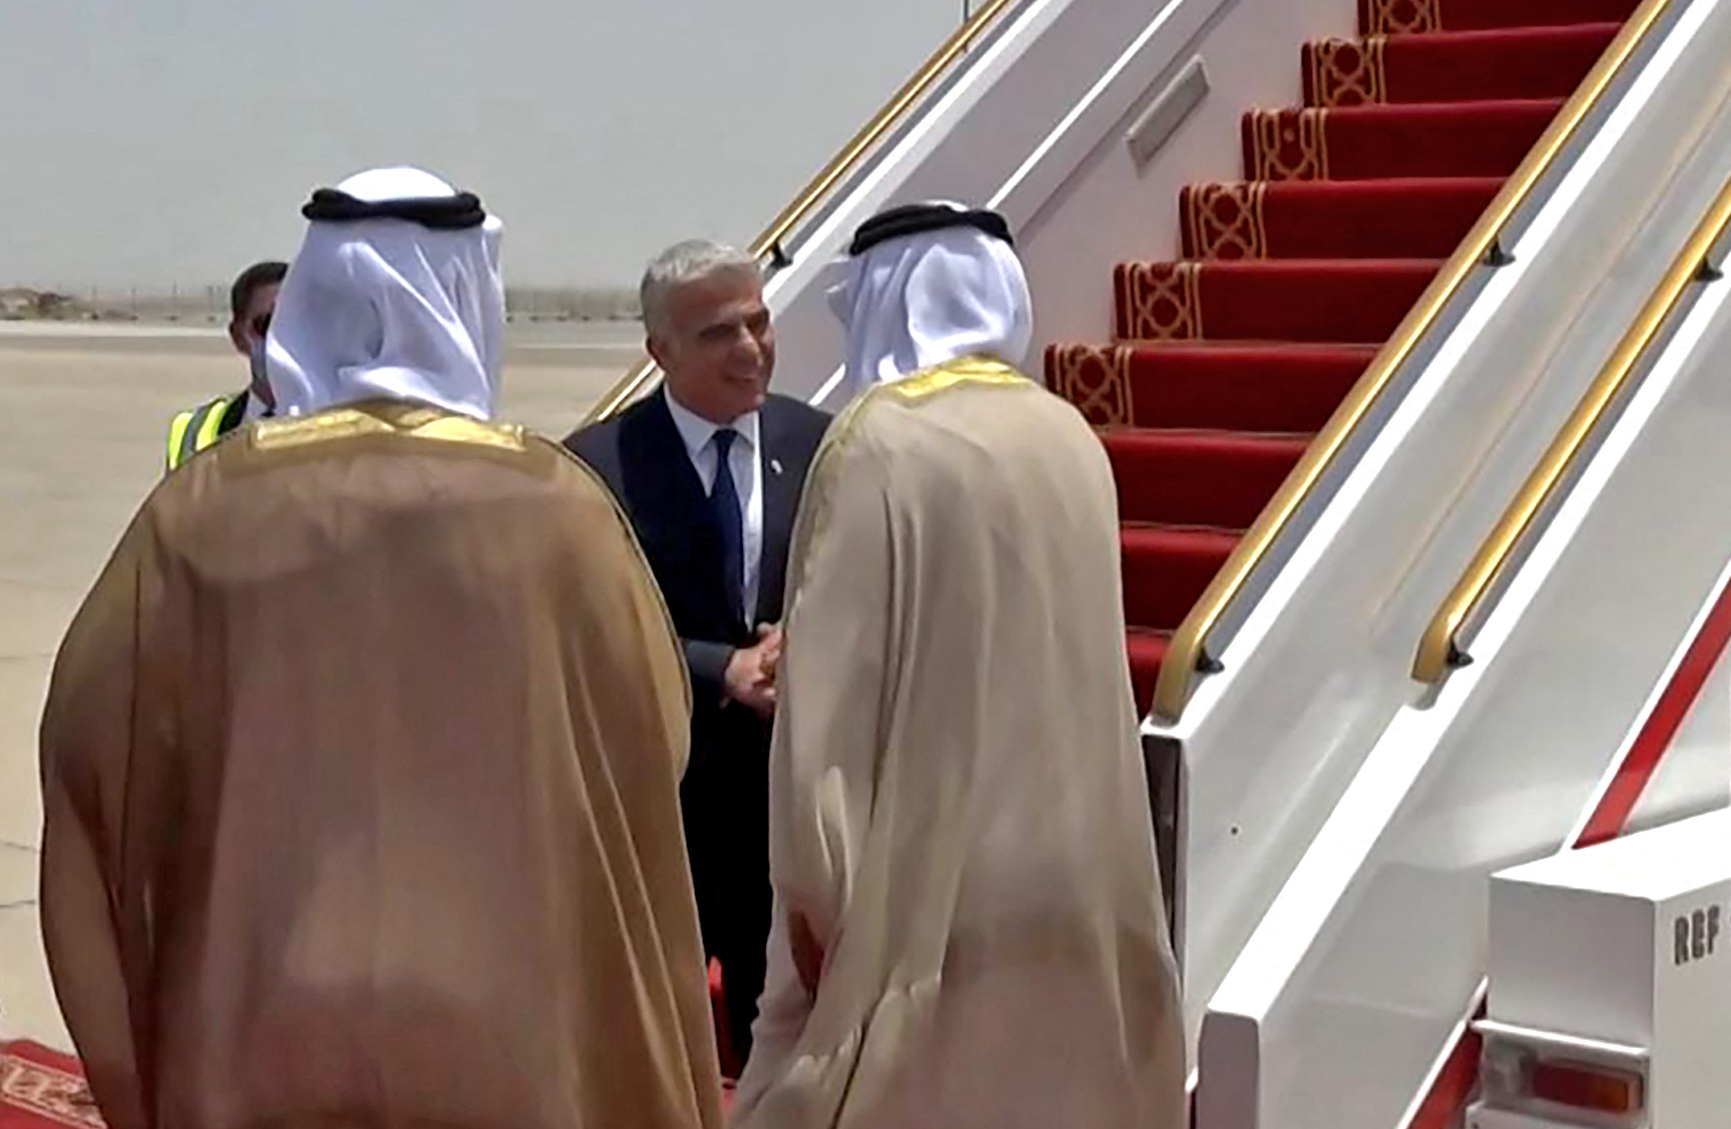 Lapid was welcomed at Abu Dhabi airport (AFP)